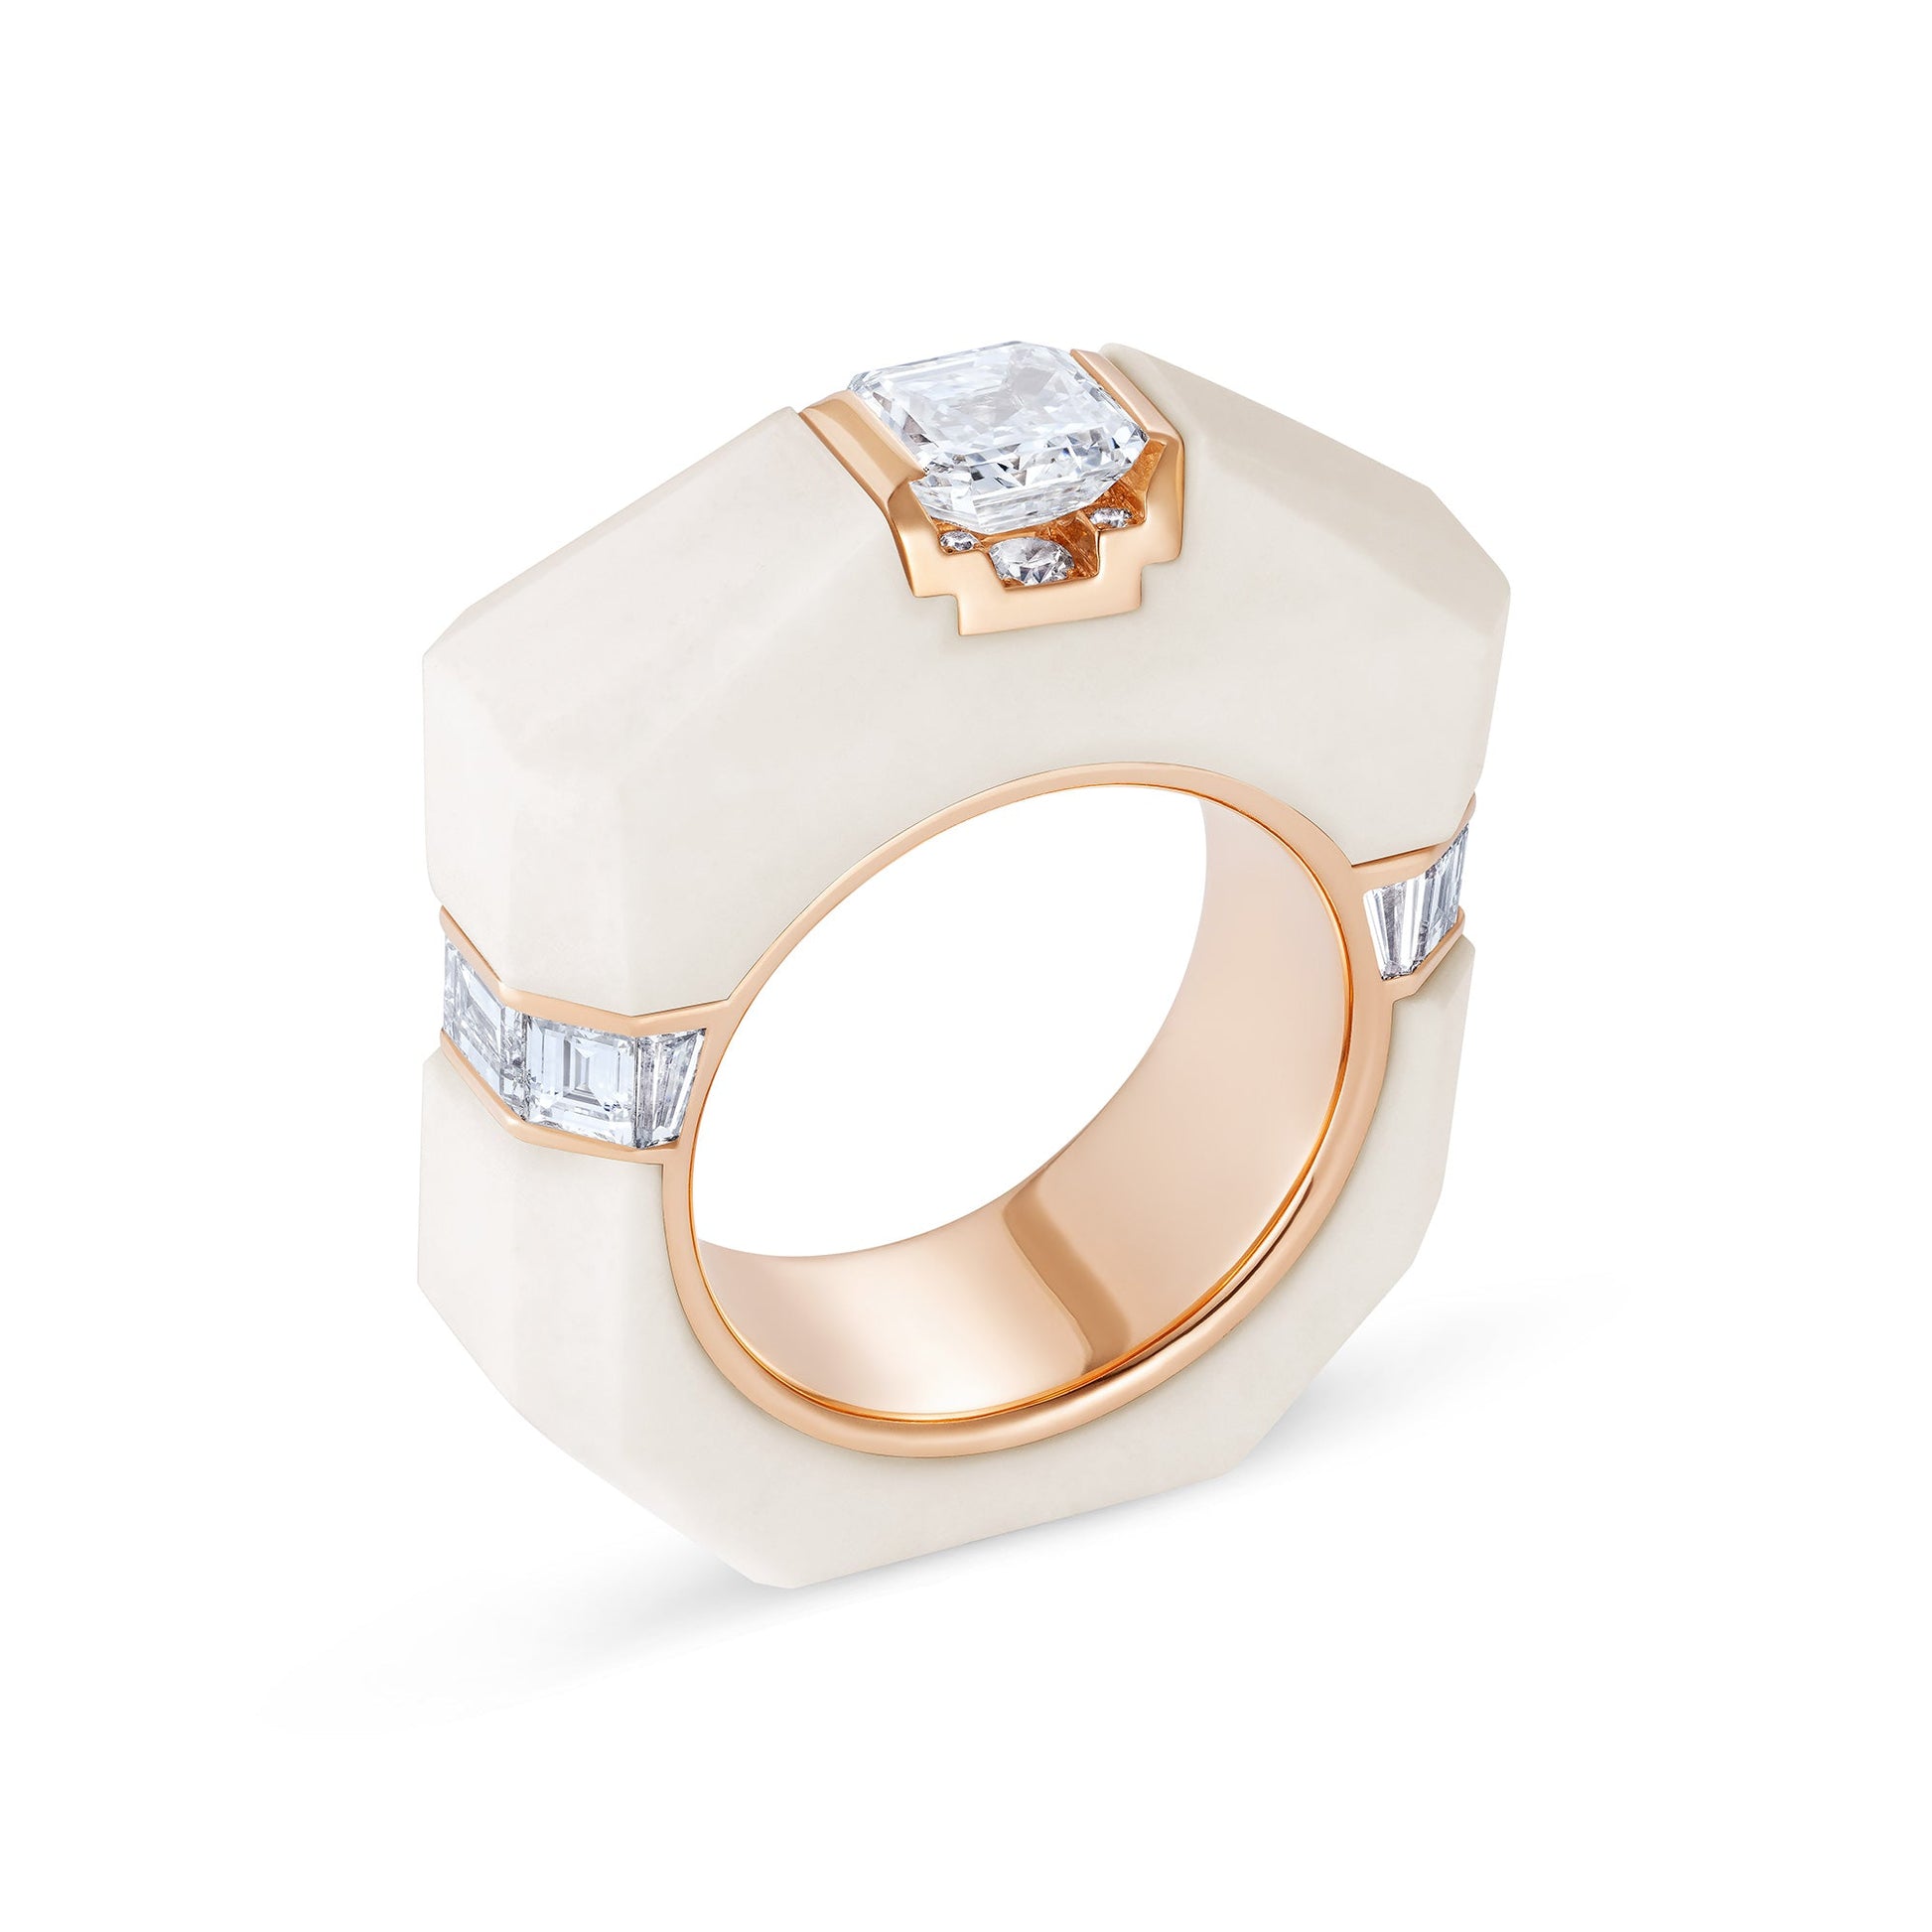 Taura ring with GIA Certified 1 ct. E VVS2 Asscher cut diamond, baguette and 8 cut diamonds and mount carved in white cacholong and 18K rose gold. - Ines Nieto London